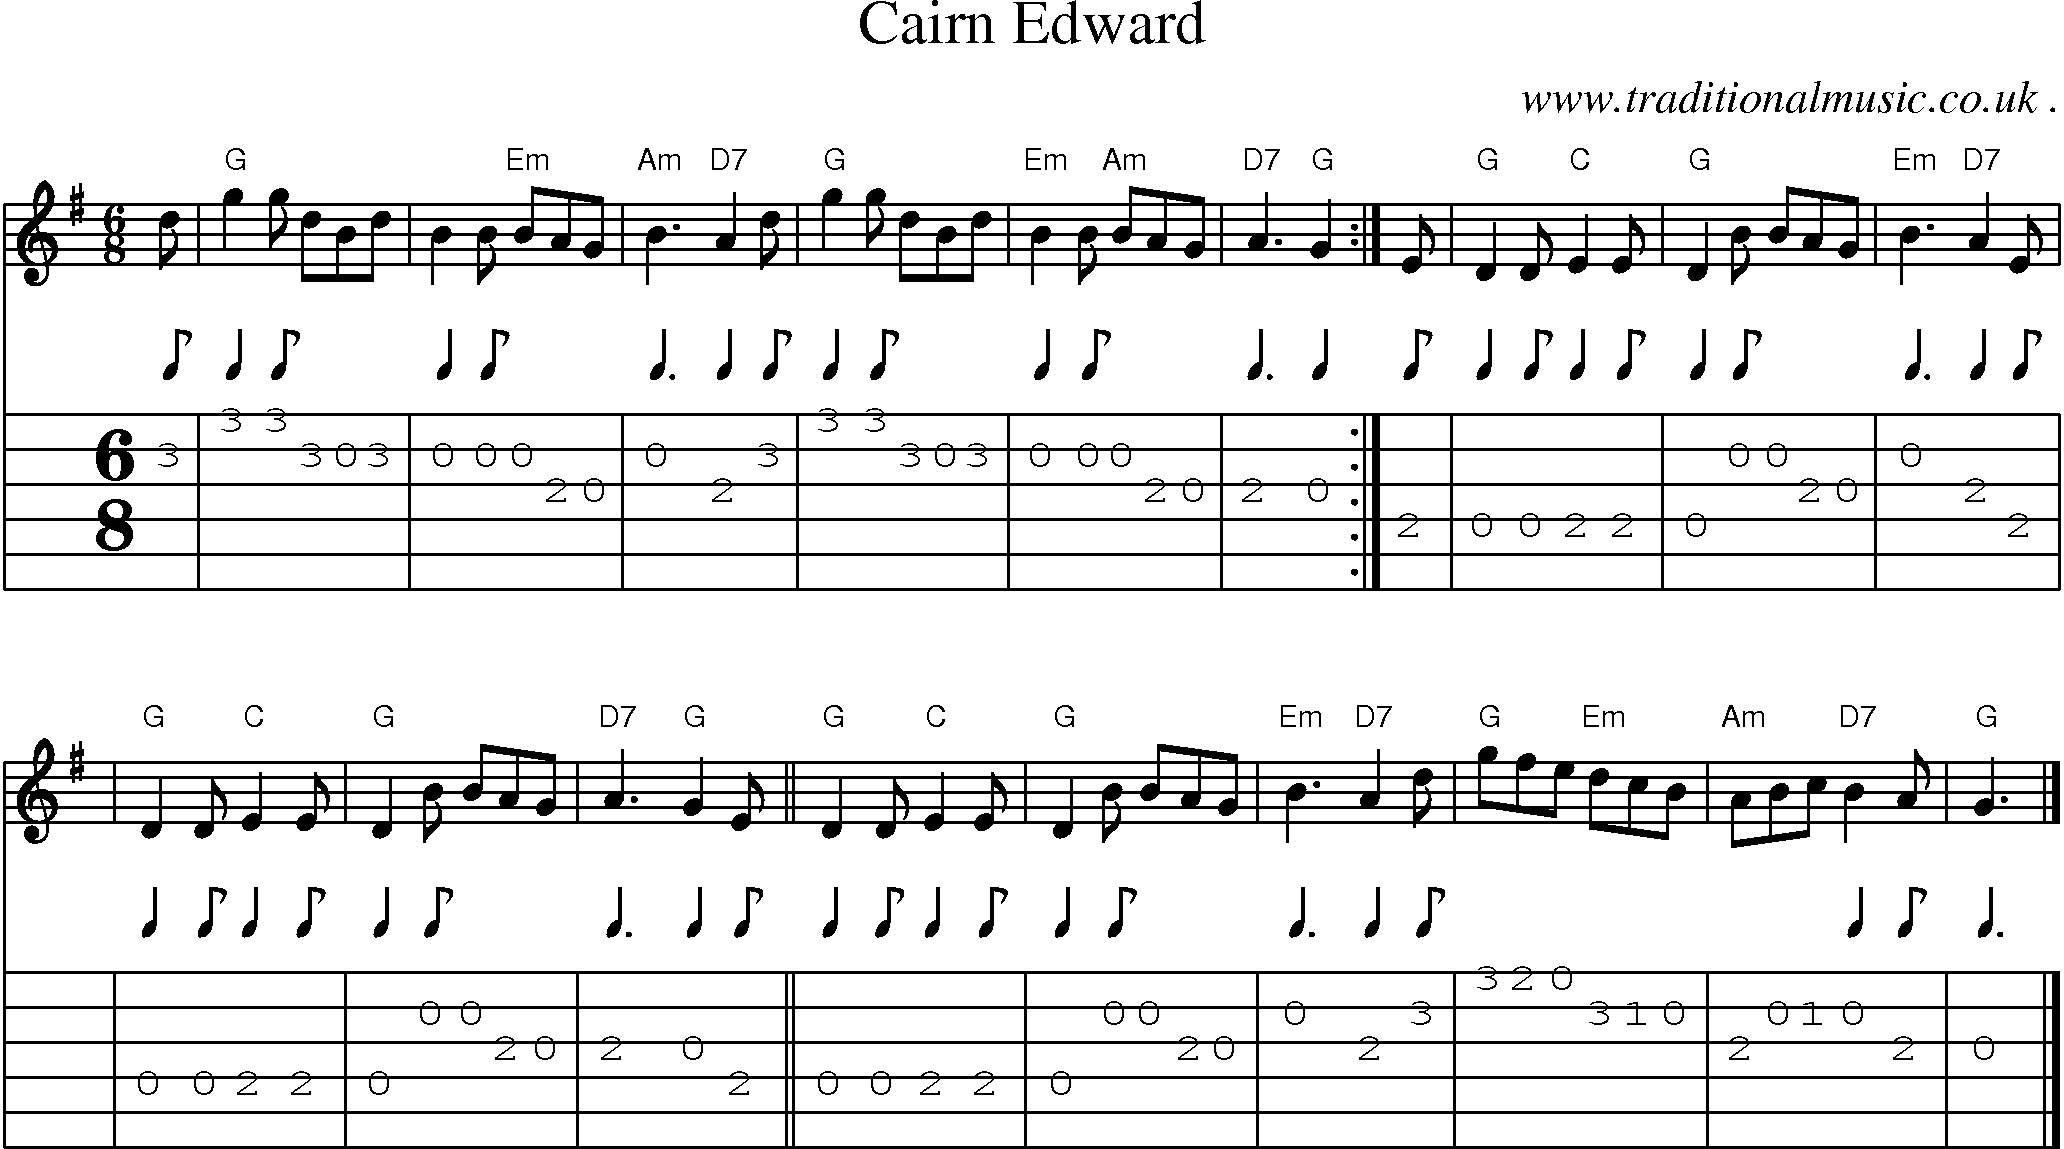 Sheet-music  score, Chords and Guitar Tabs for Cairn Edward